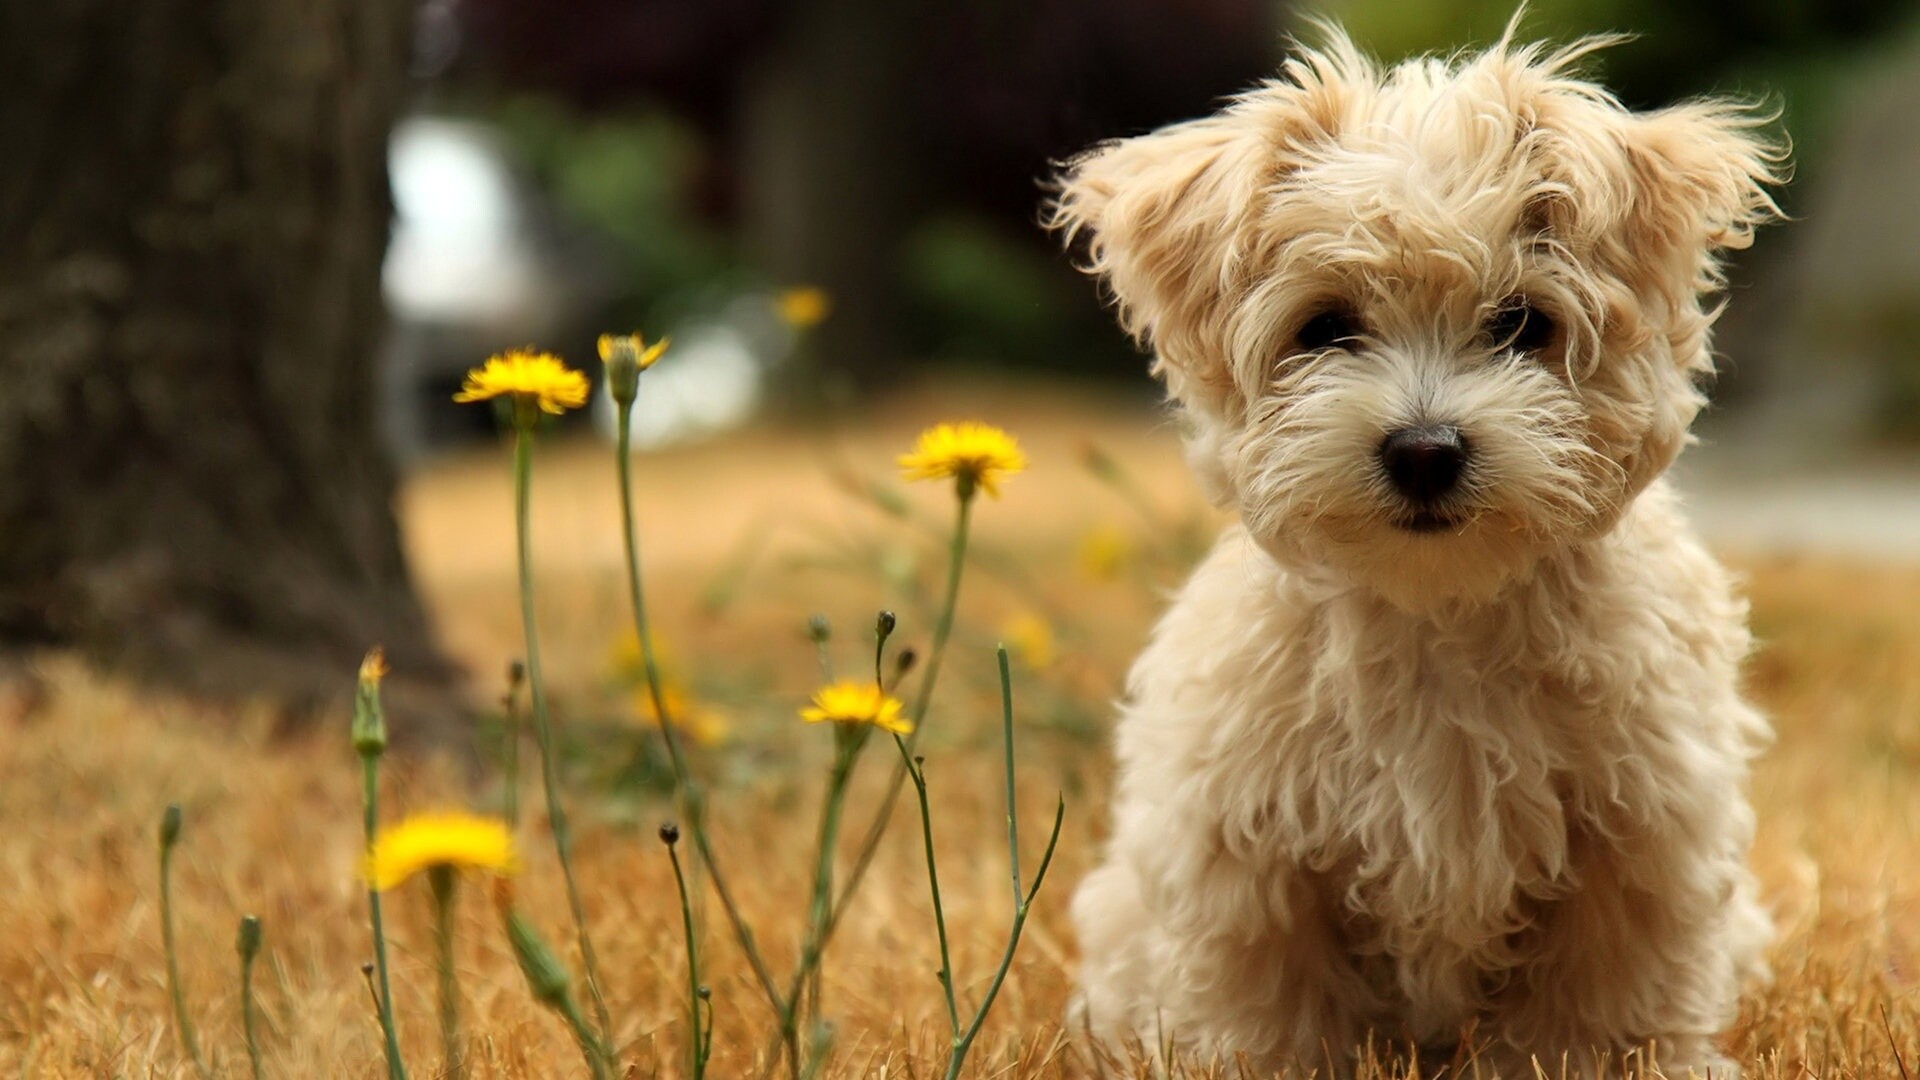 Dog: Most popular domestic animals in the world, Puppy. 1920x1080 Full HD Wallpaper.